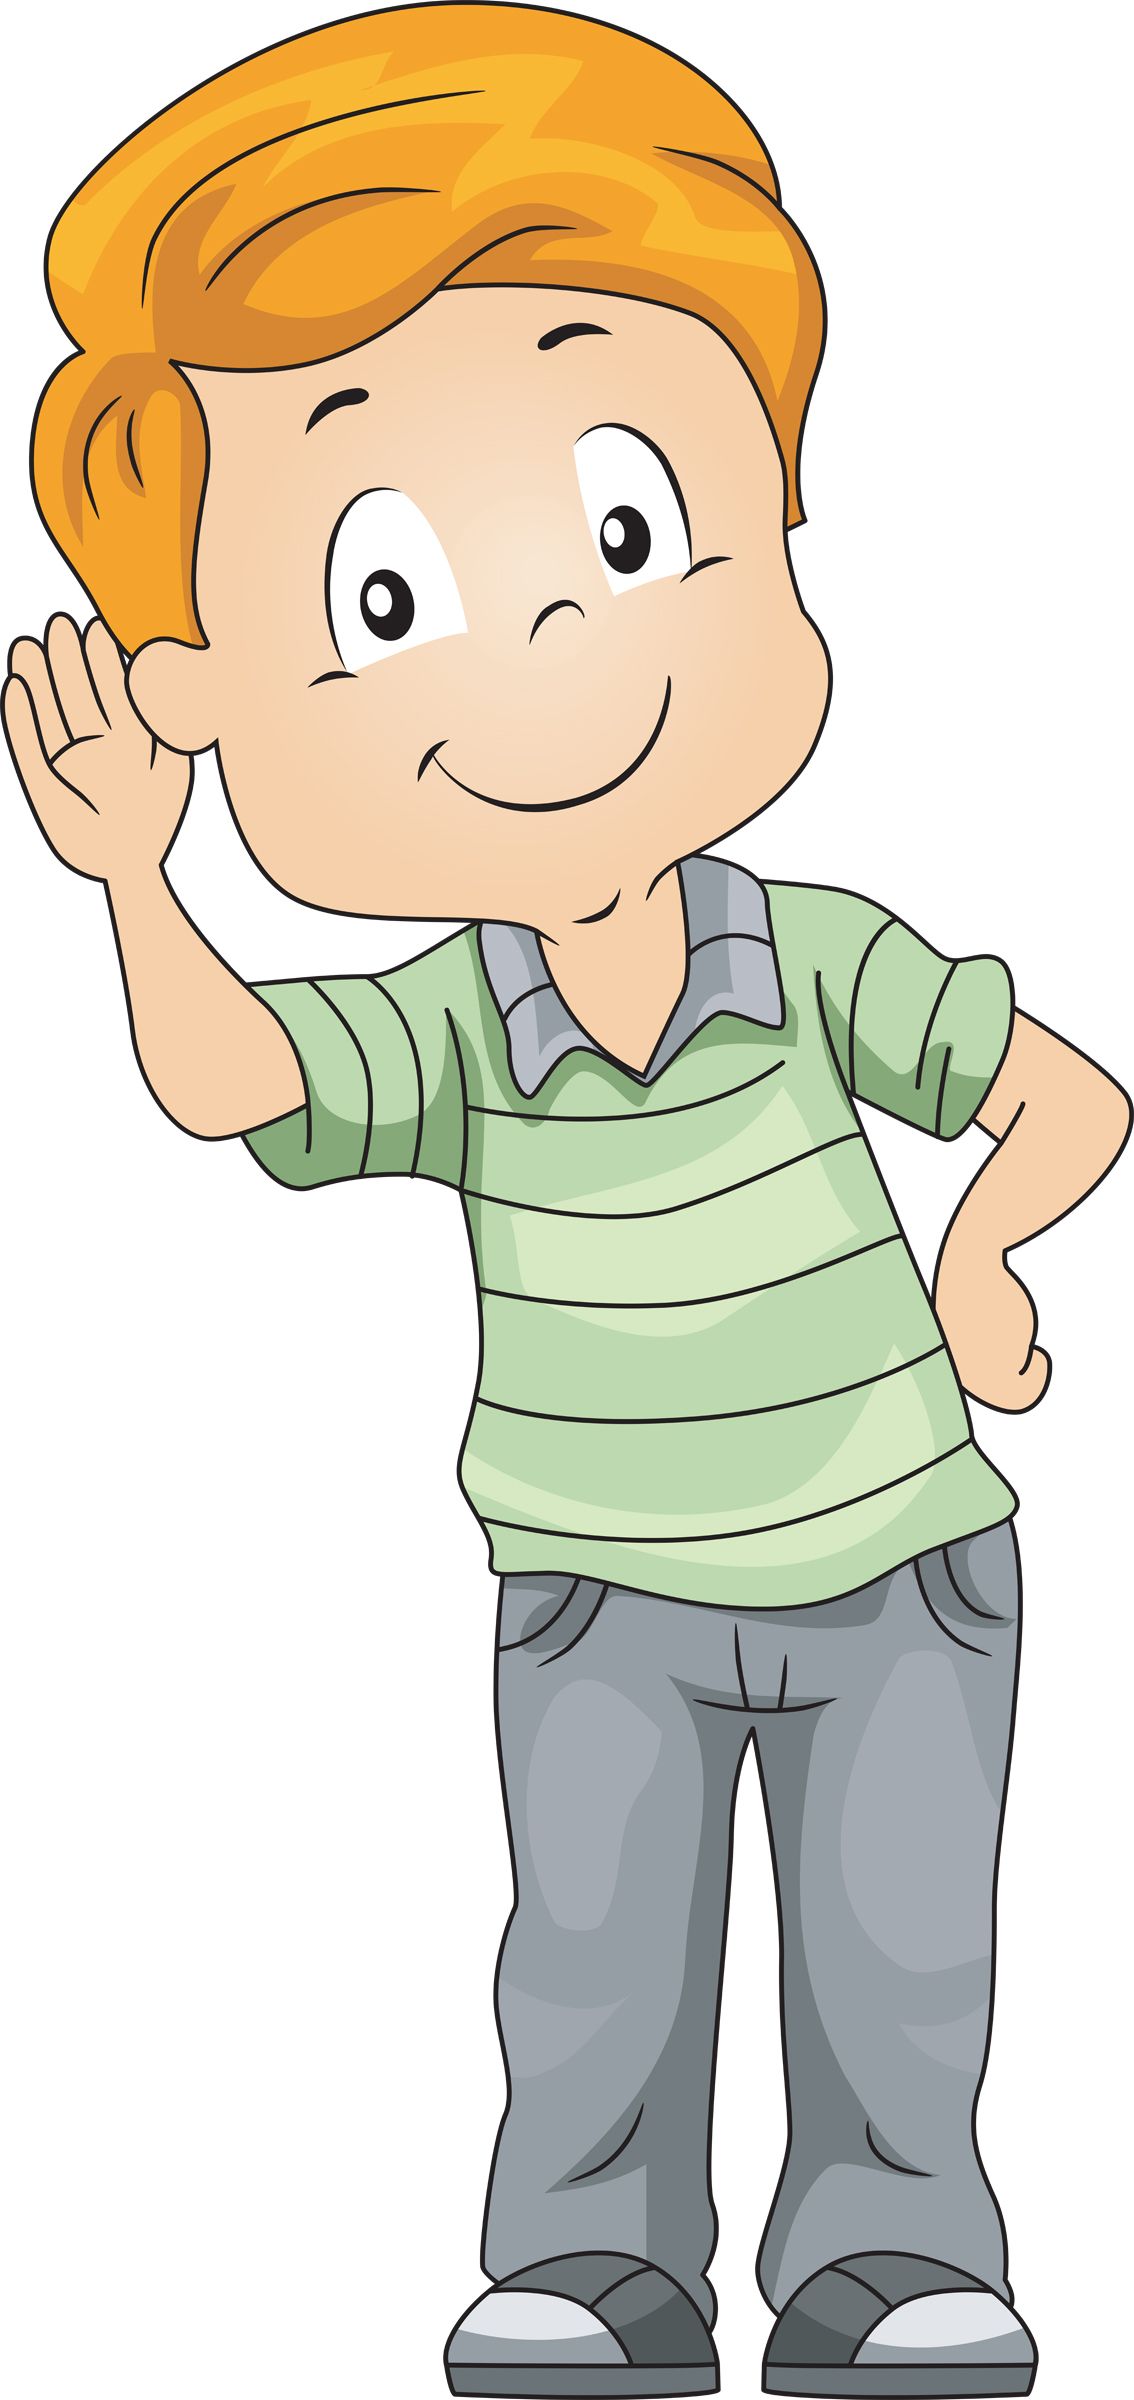 Brother clipart cartoon, Brother cartoon Transparent FREE for download